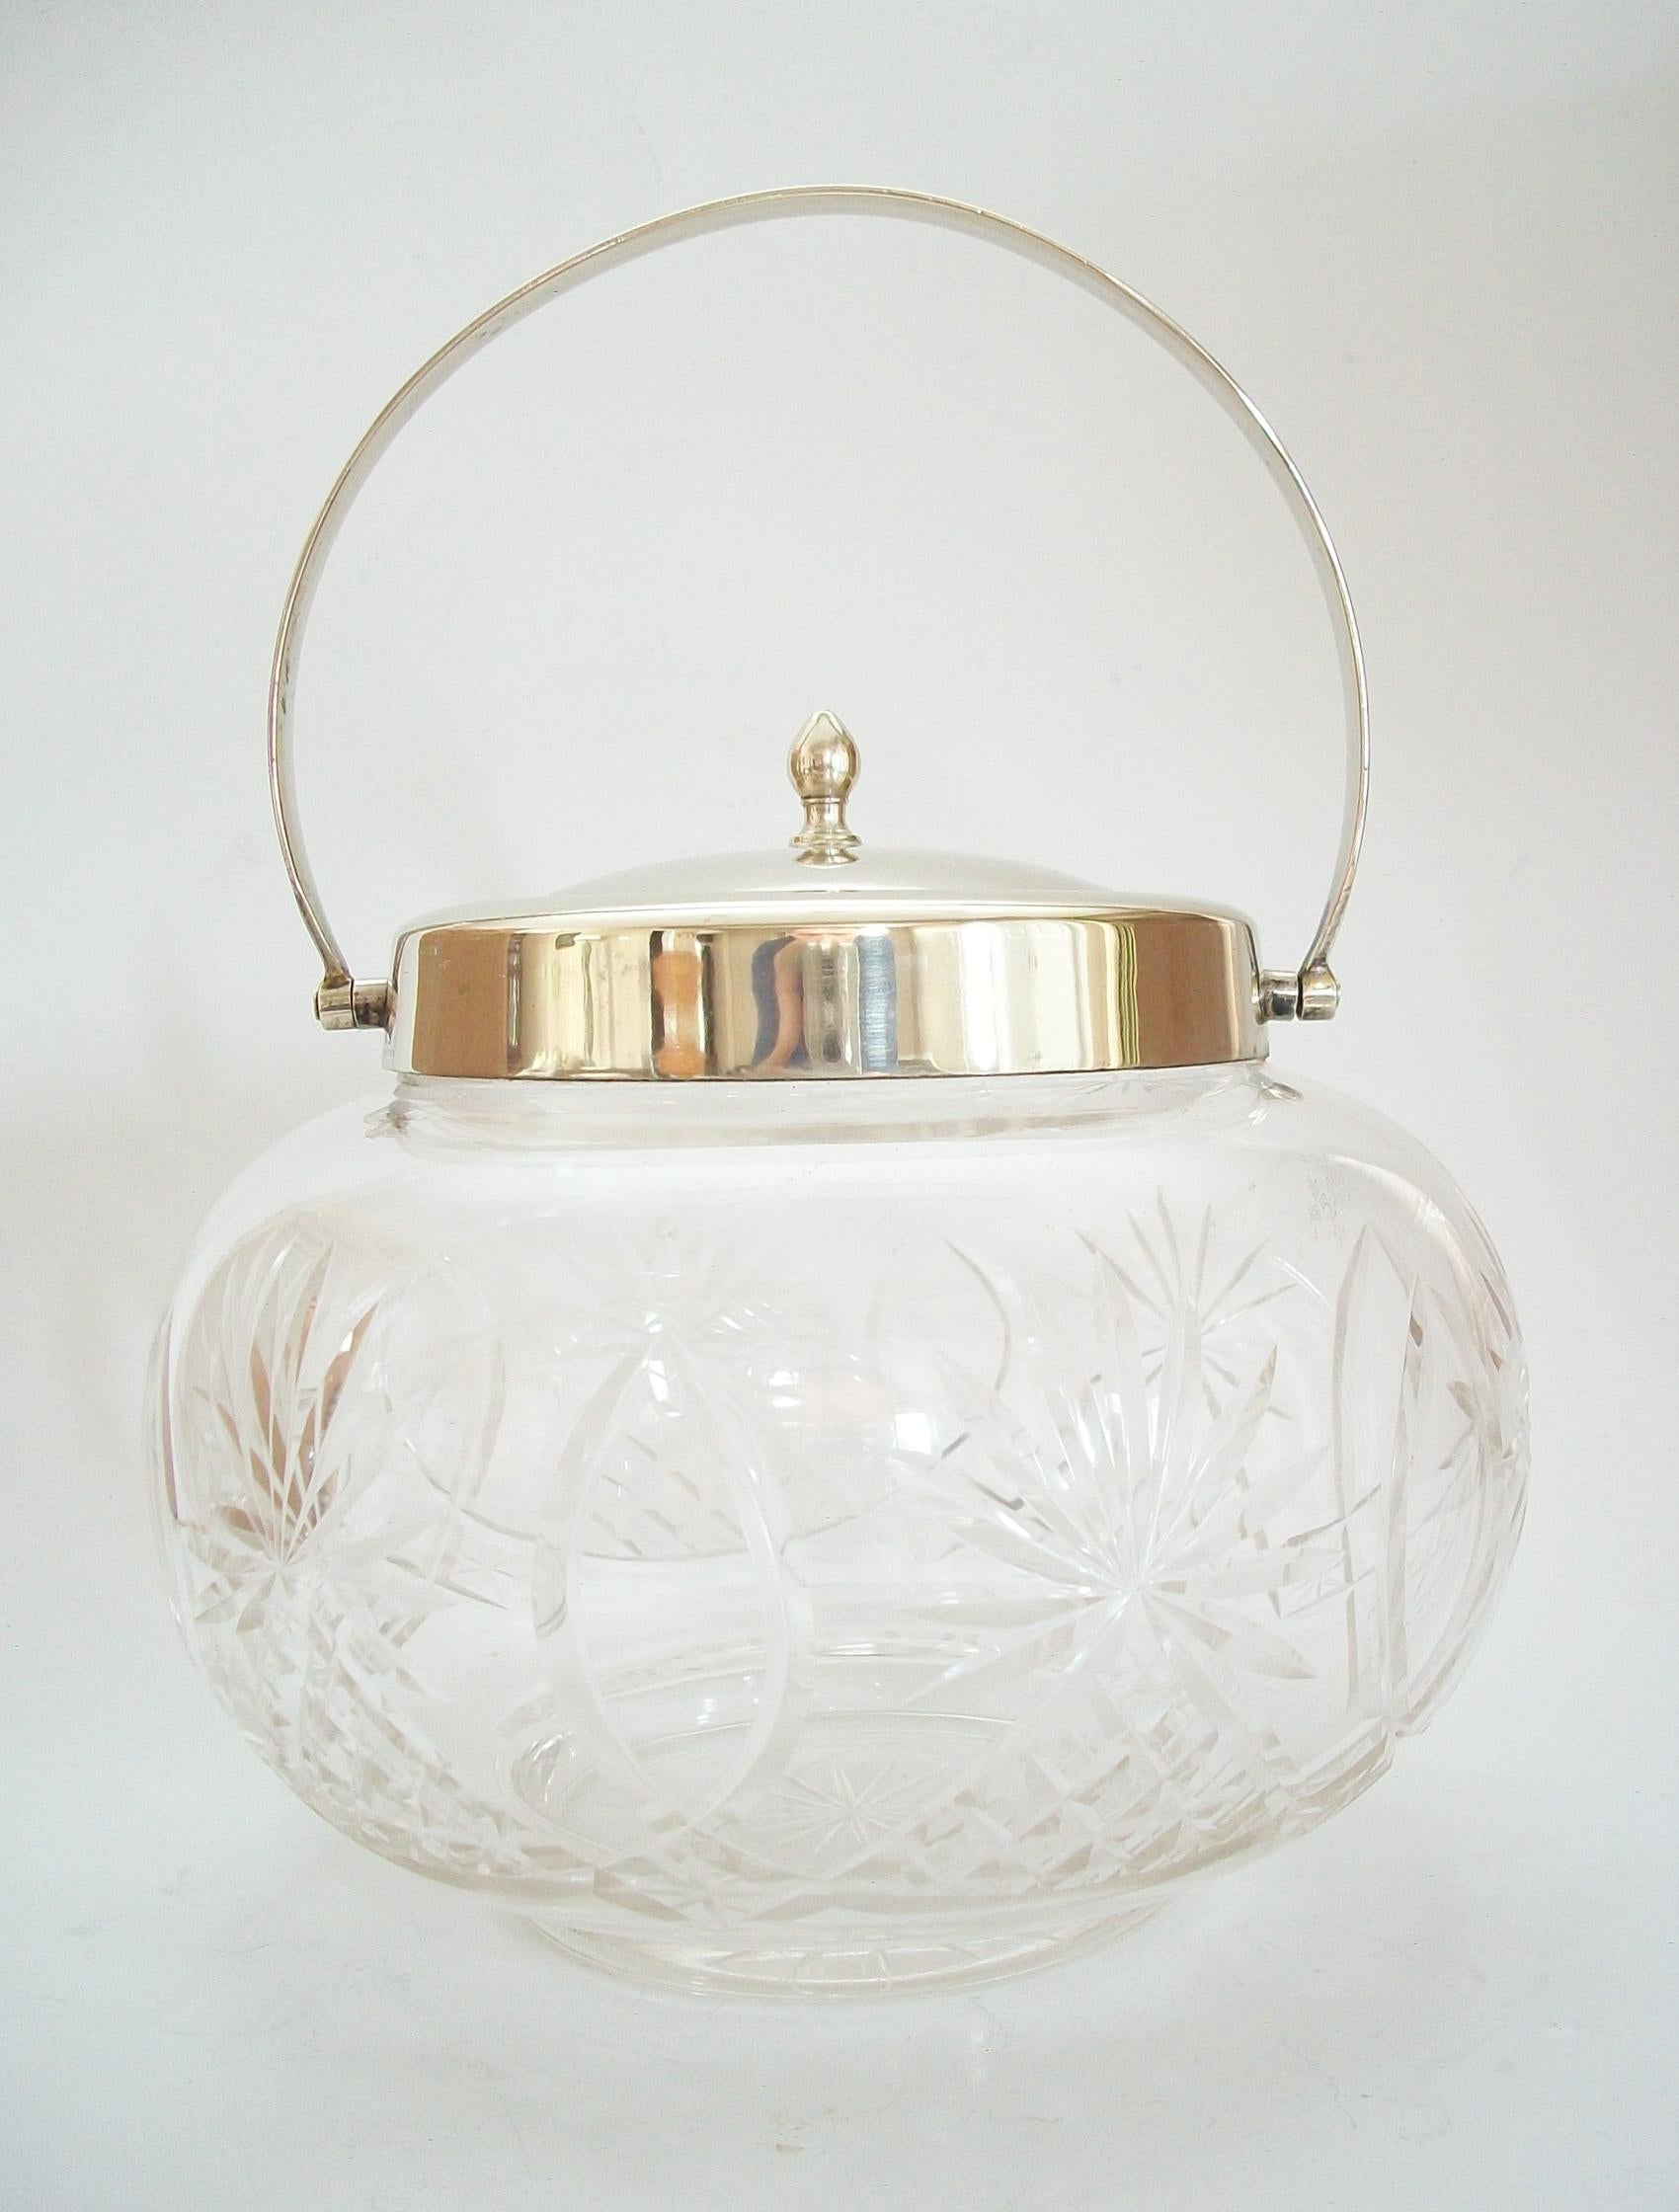 Cut Crystal & Silverplate Biscuit Barrel - United Kingdom - Early 20th Century In Good Condition For Sale In Chatham, ON